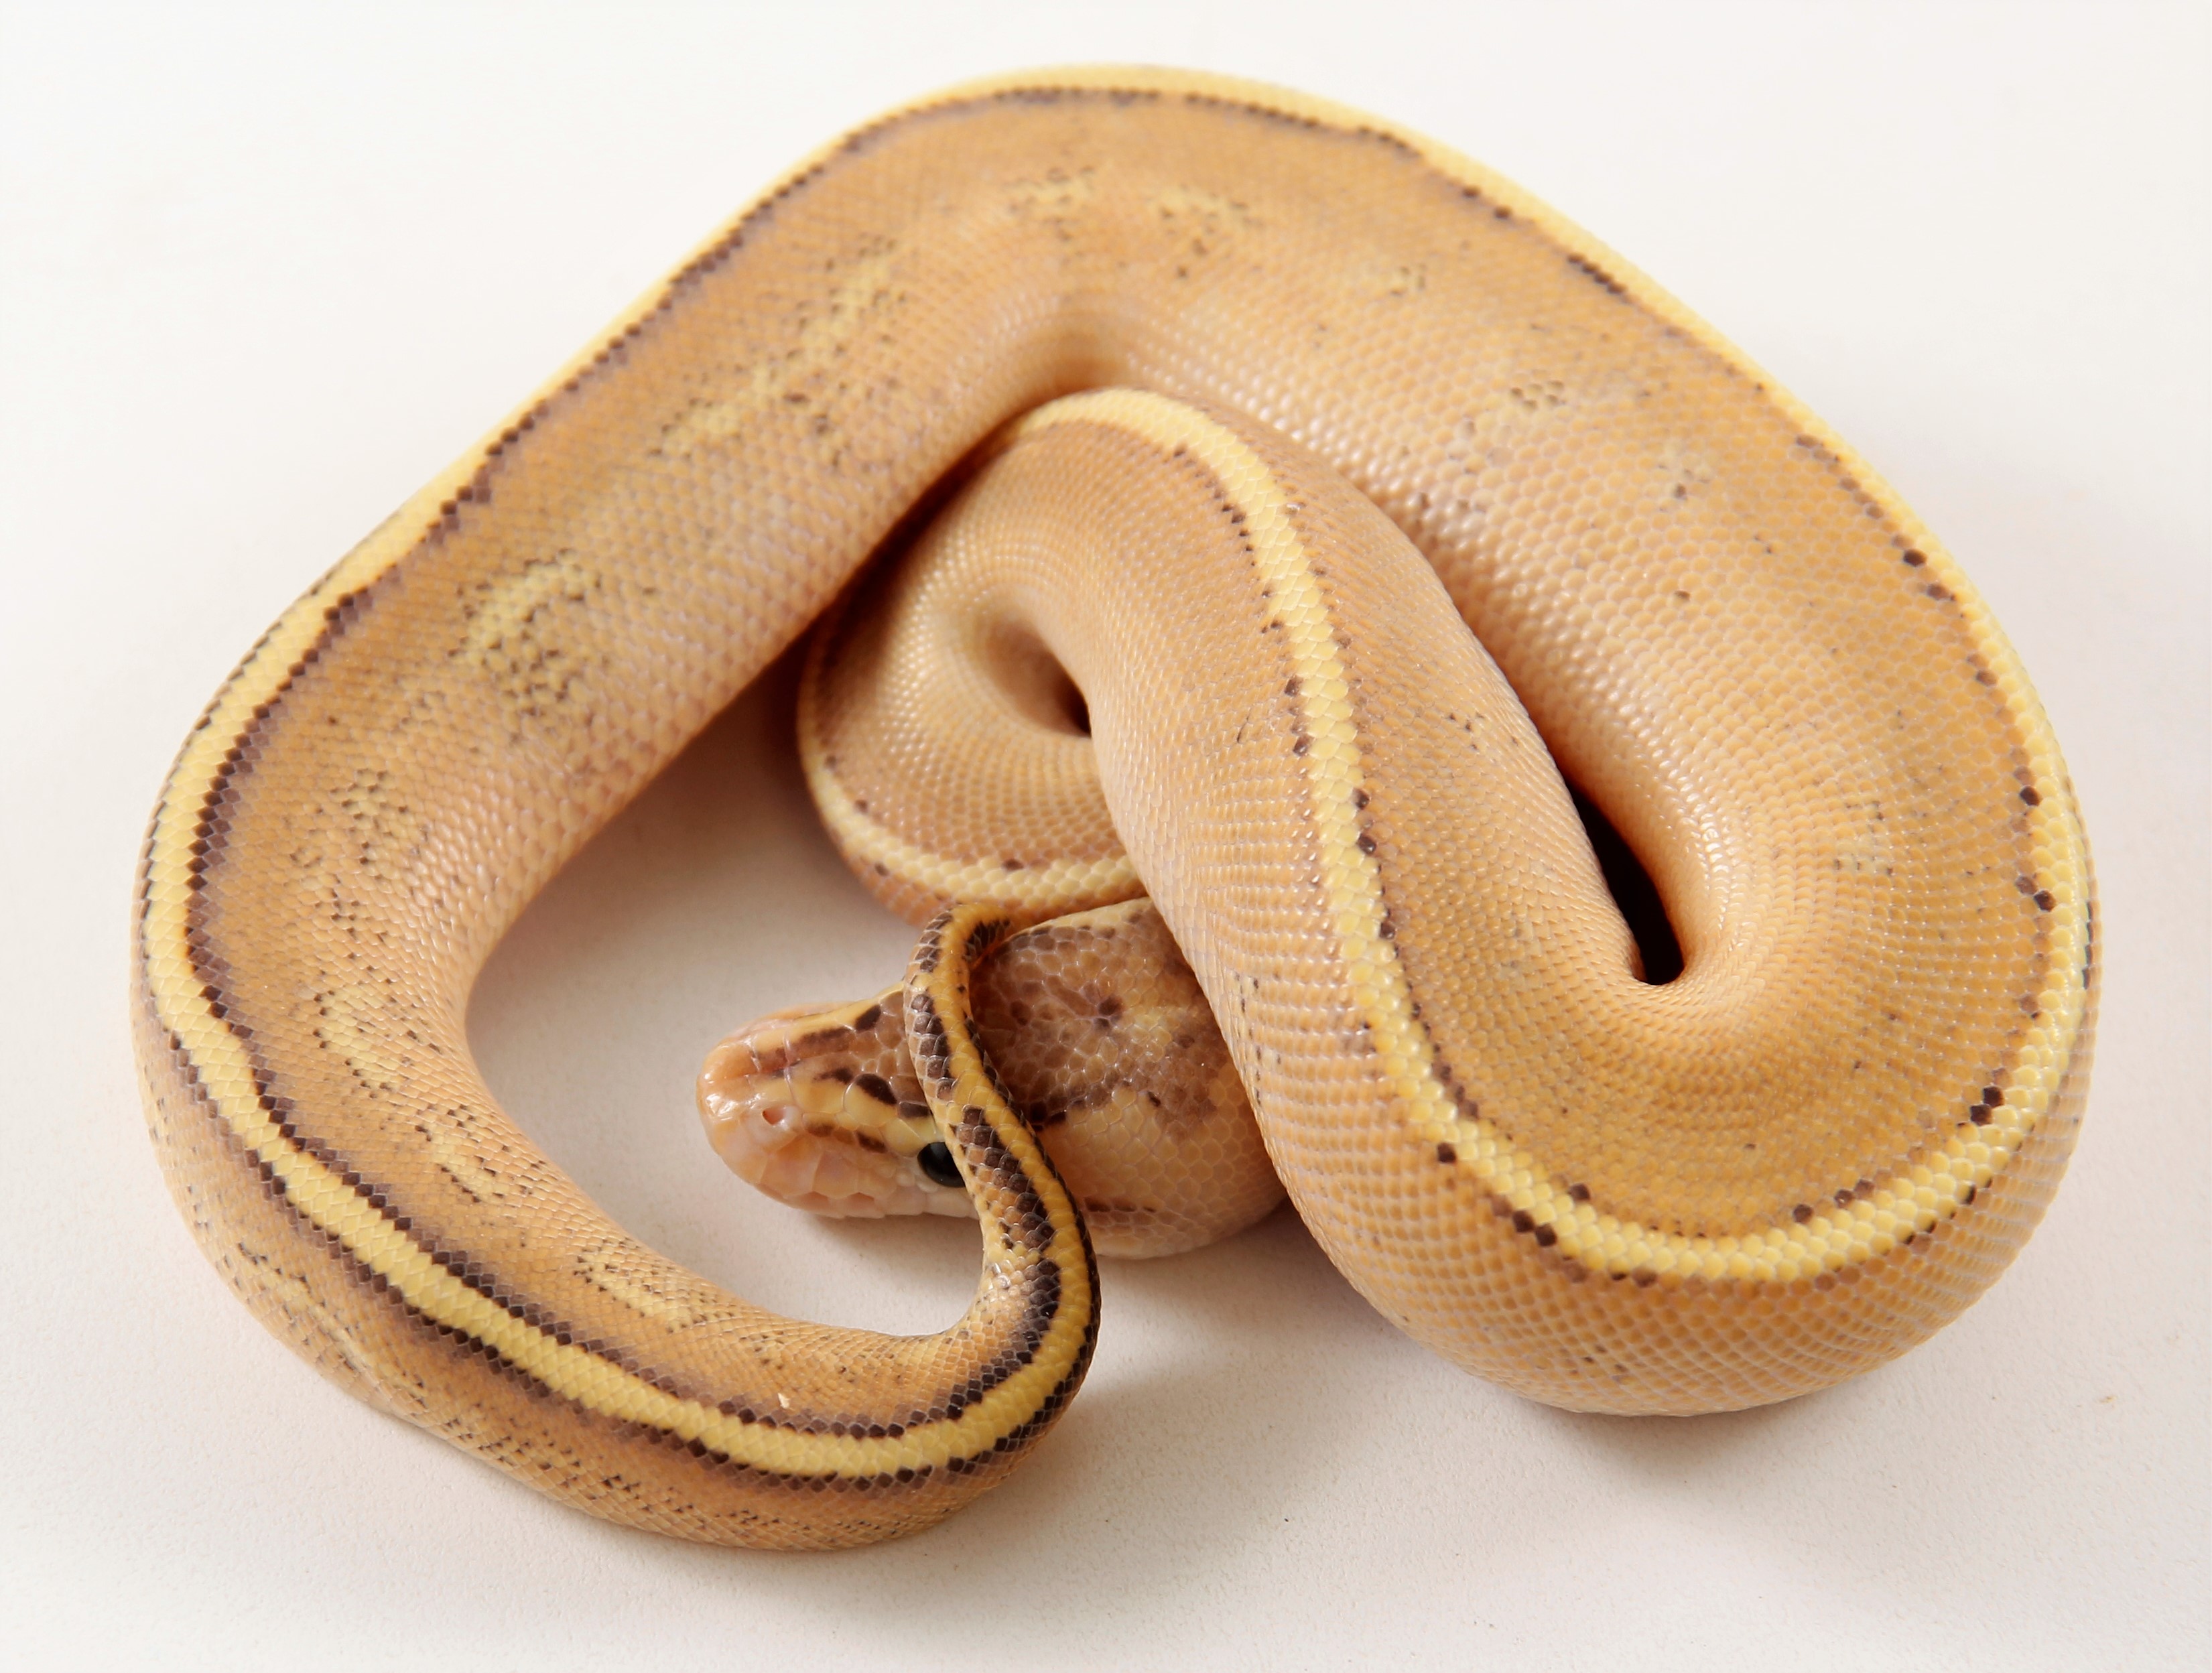 Super Spark Ball Python by The Gourmet Rodent